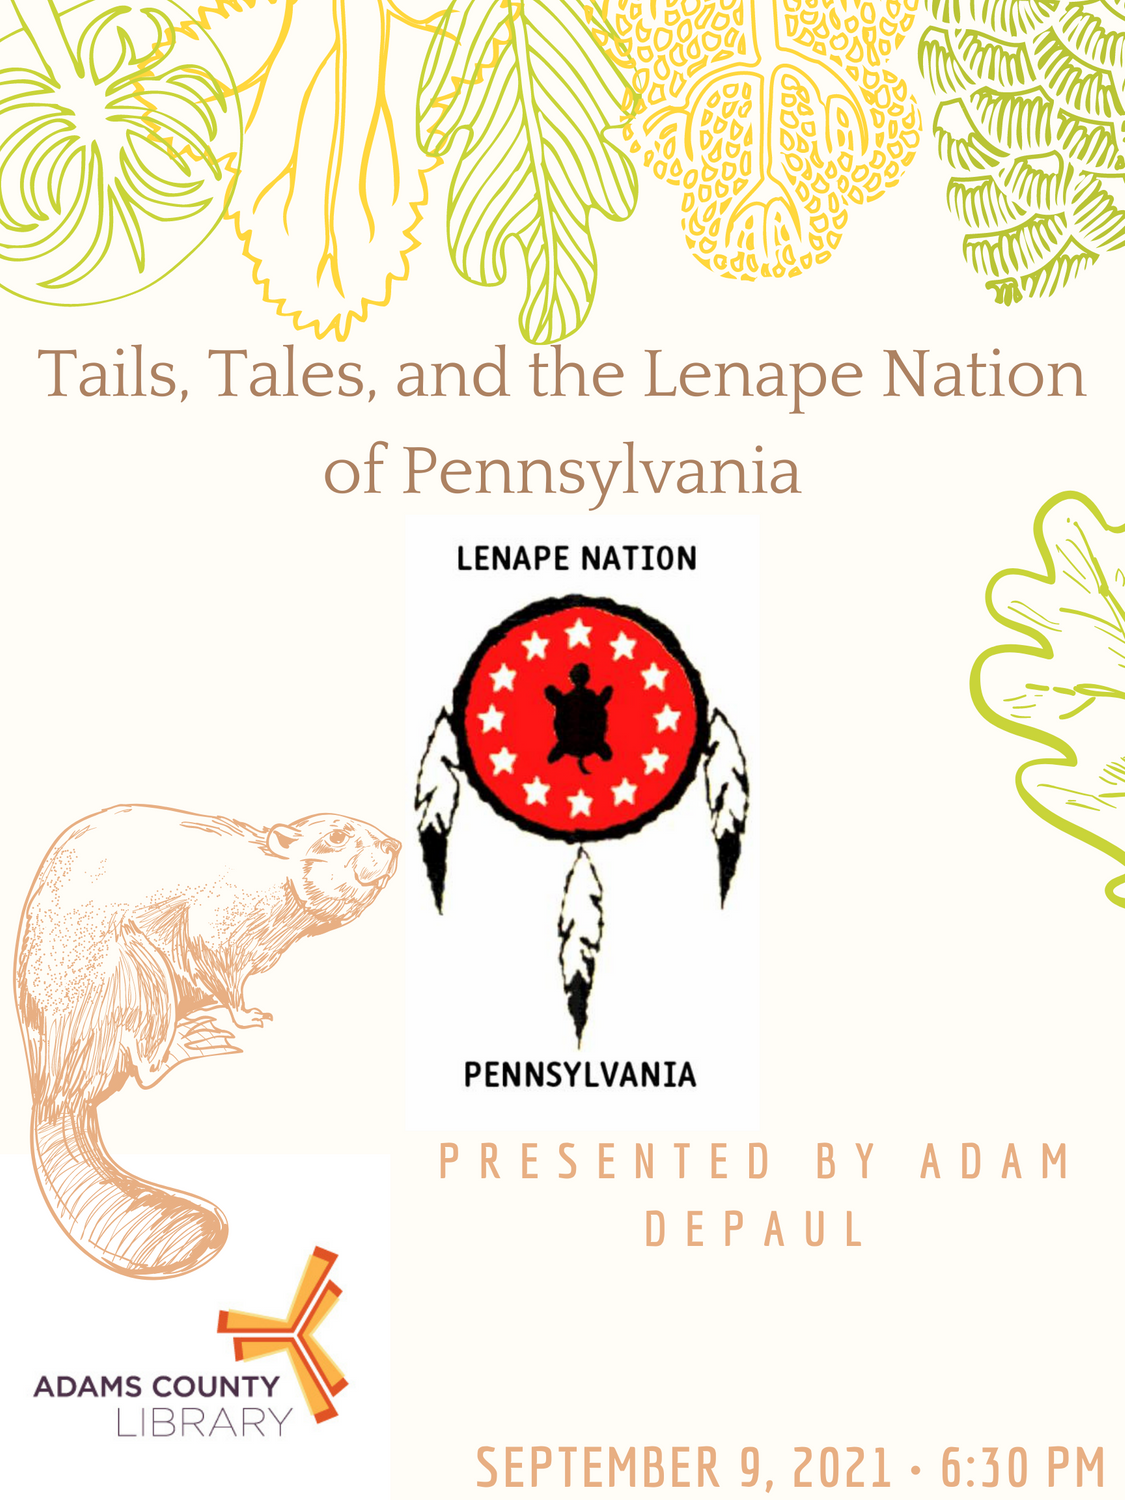 Drawings of various leaves and a beaver with the seal of the Lenape Nation of Pennsylvania centered, and the ACLS logo in the lower left-hand corner. The text reads "Tails, Tales, and the Lenape Nation of Pennsylvania; Presented by Adam DePaul; September 9, 2021, 6:30 PM"